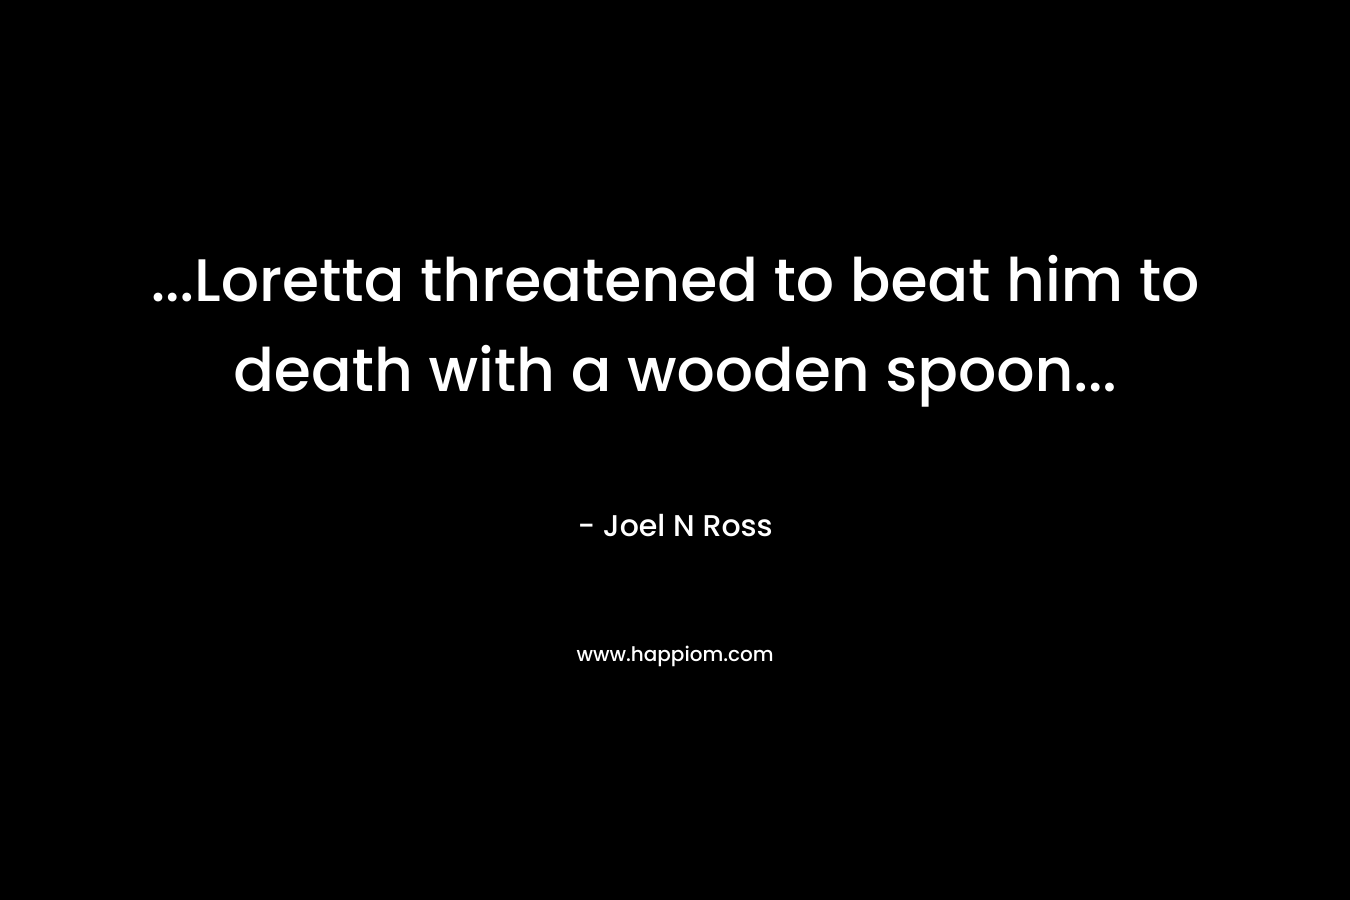 ...Loretta threatened to beat him to death with a wooden spoon...